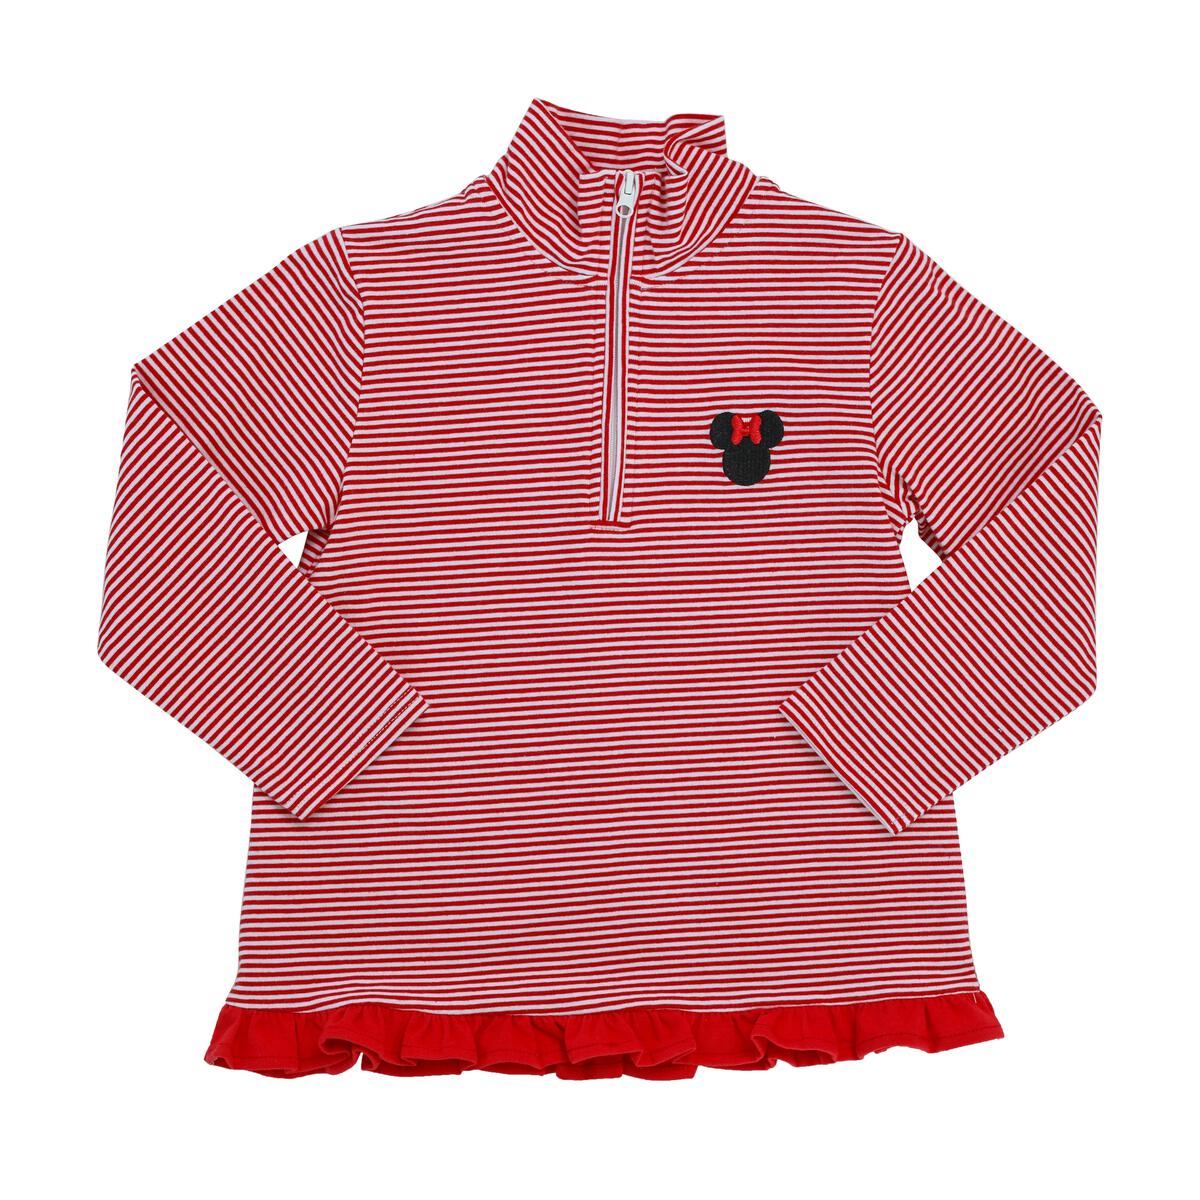 A red and white Itsy Bitsy 1/4 Zip Pullover - Mouse with ruffled ruffles, giving it a sporty and trendy look.